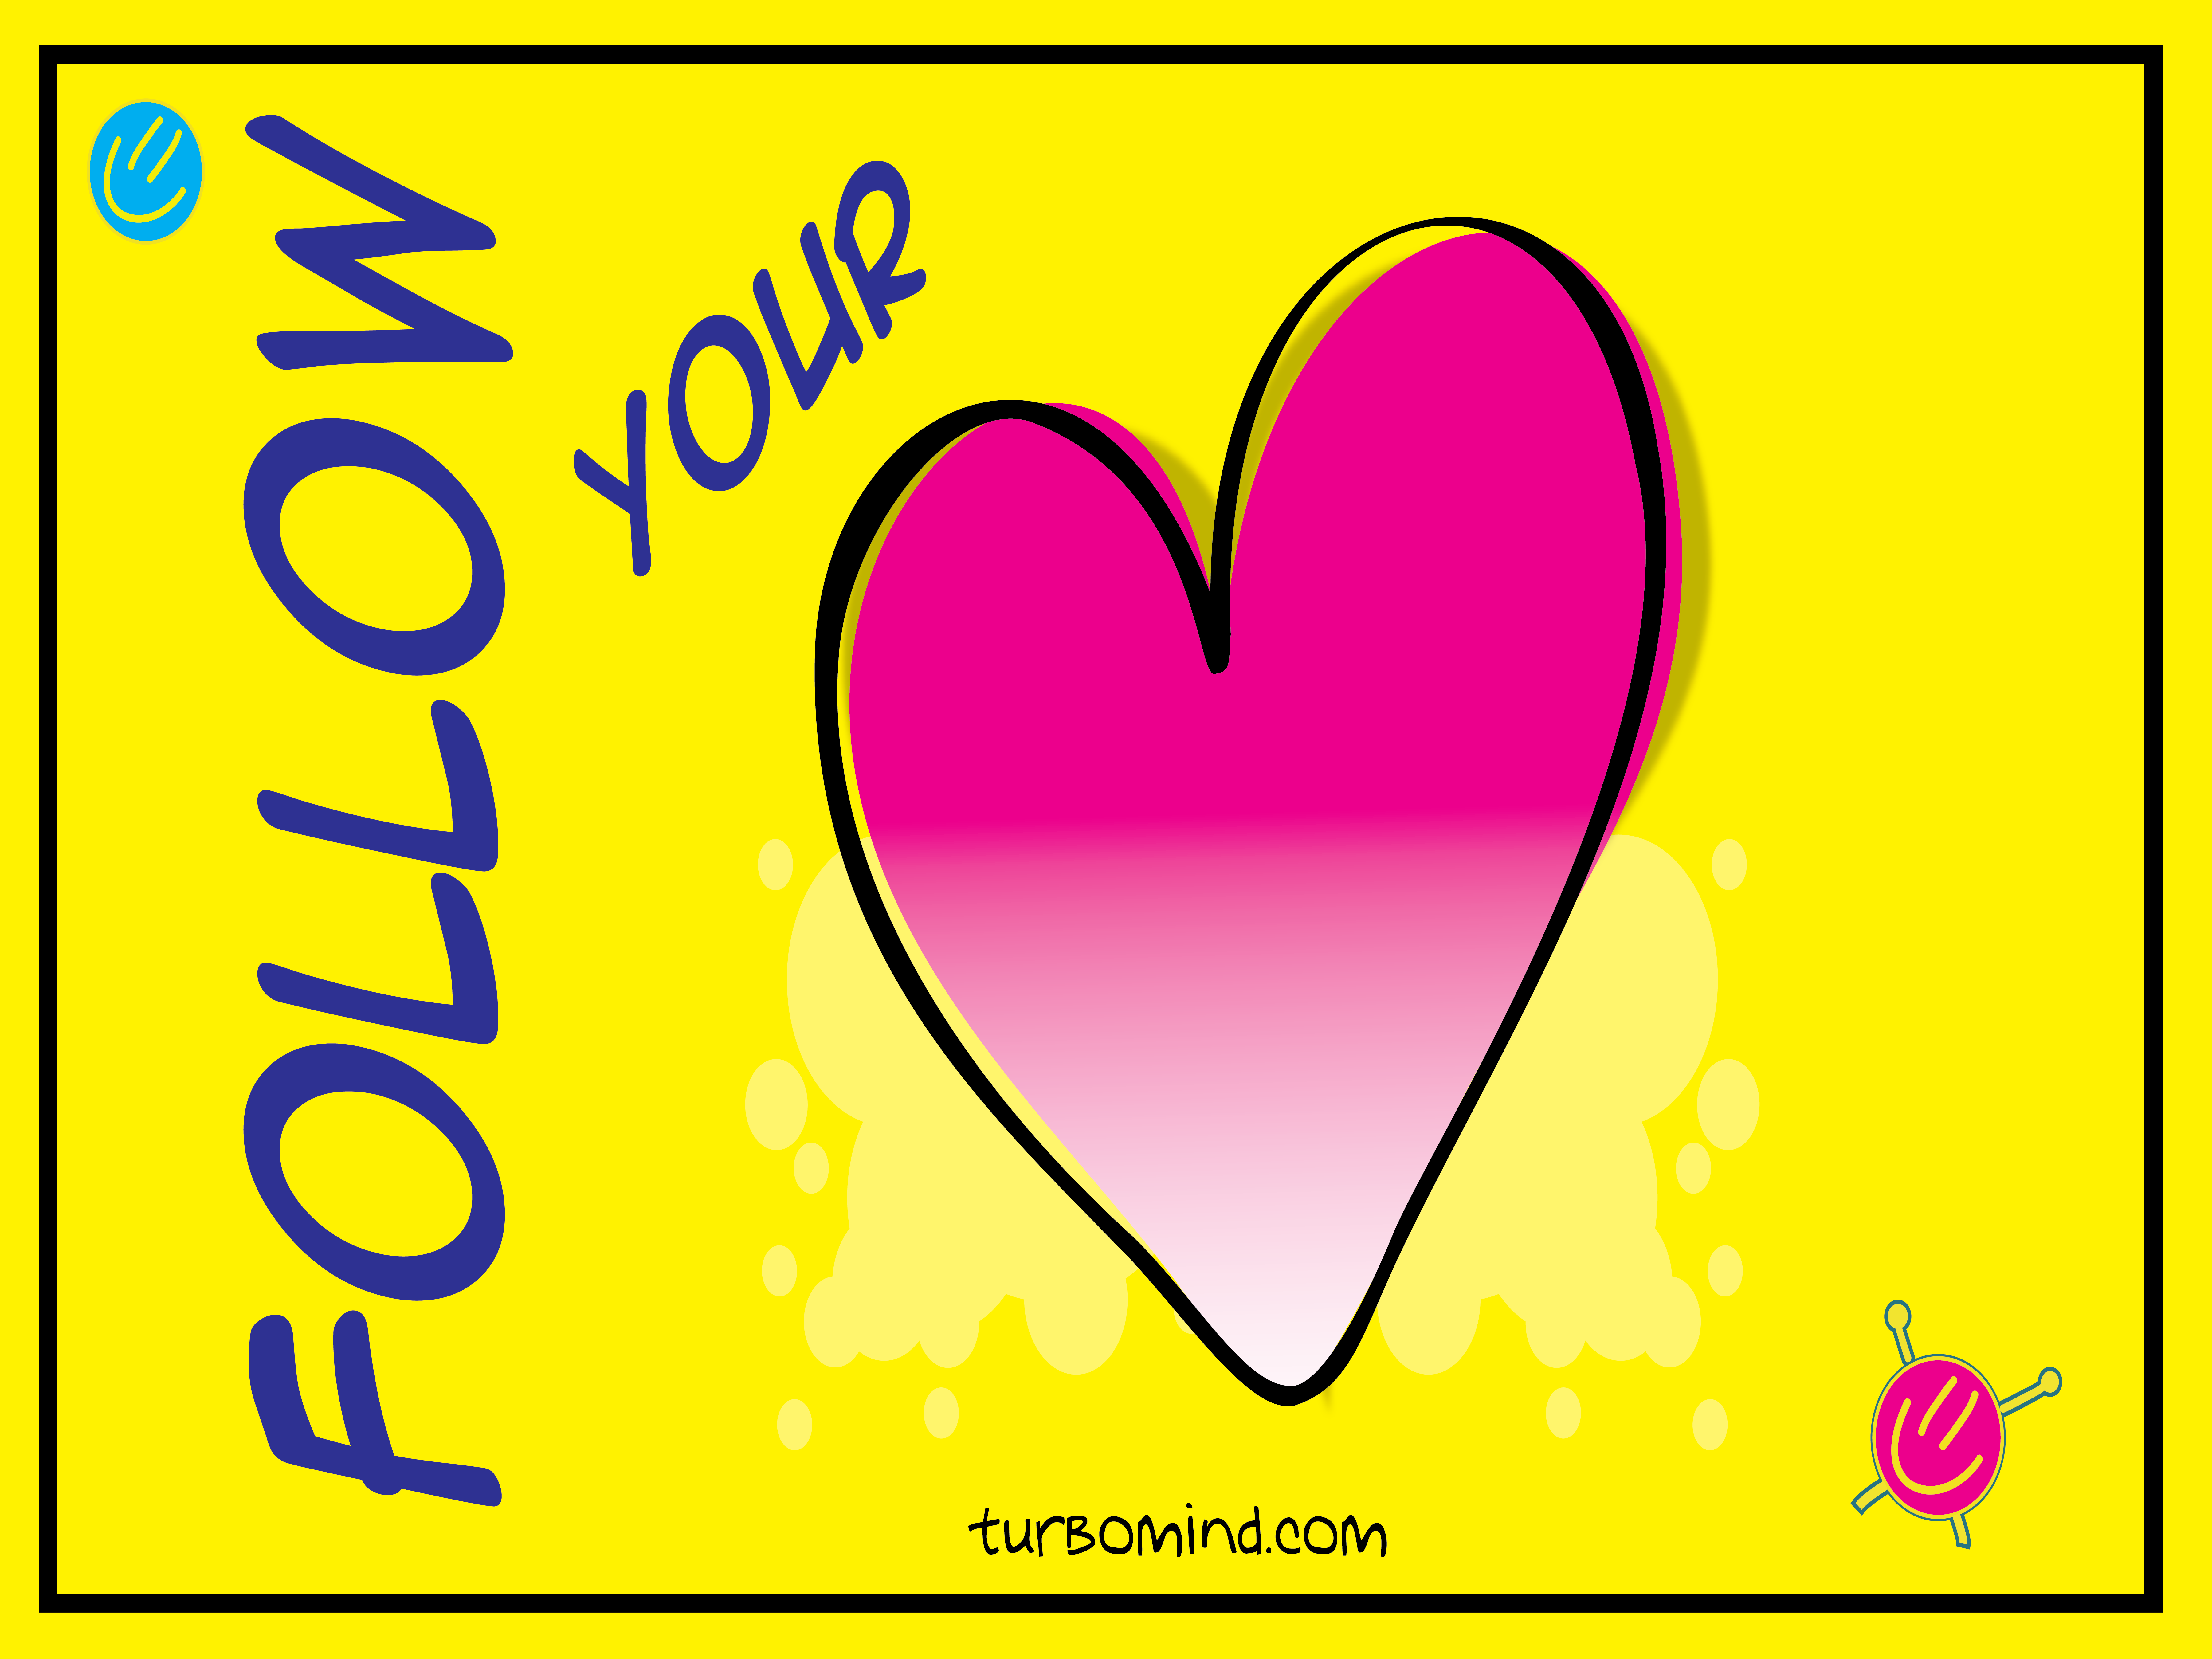 TURBOMIND #12, “FOLLOW YOUR HEART” NFT